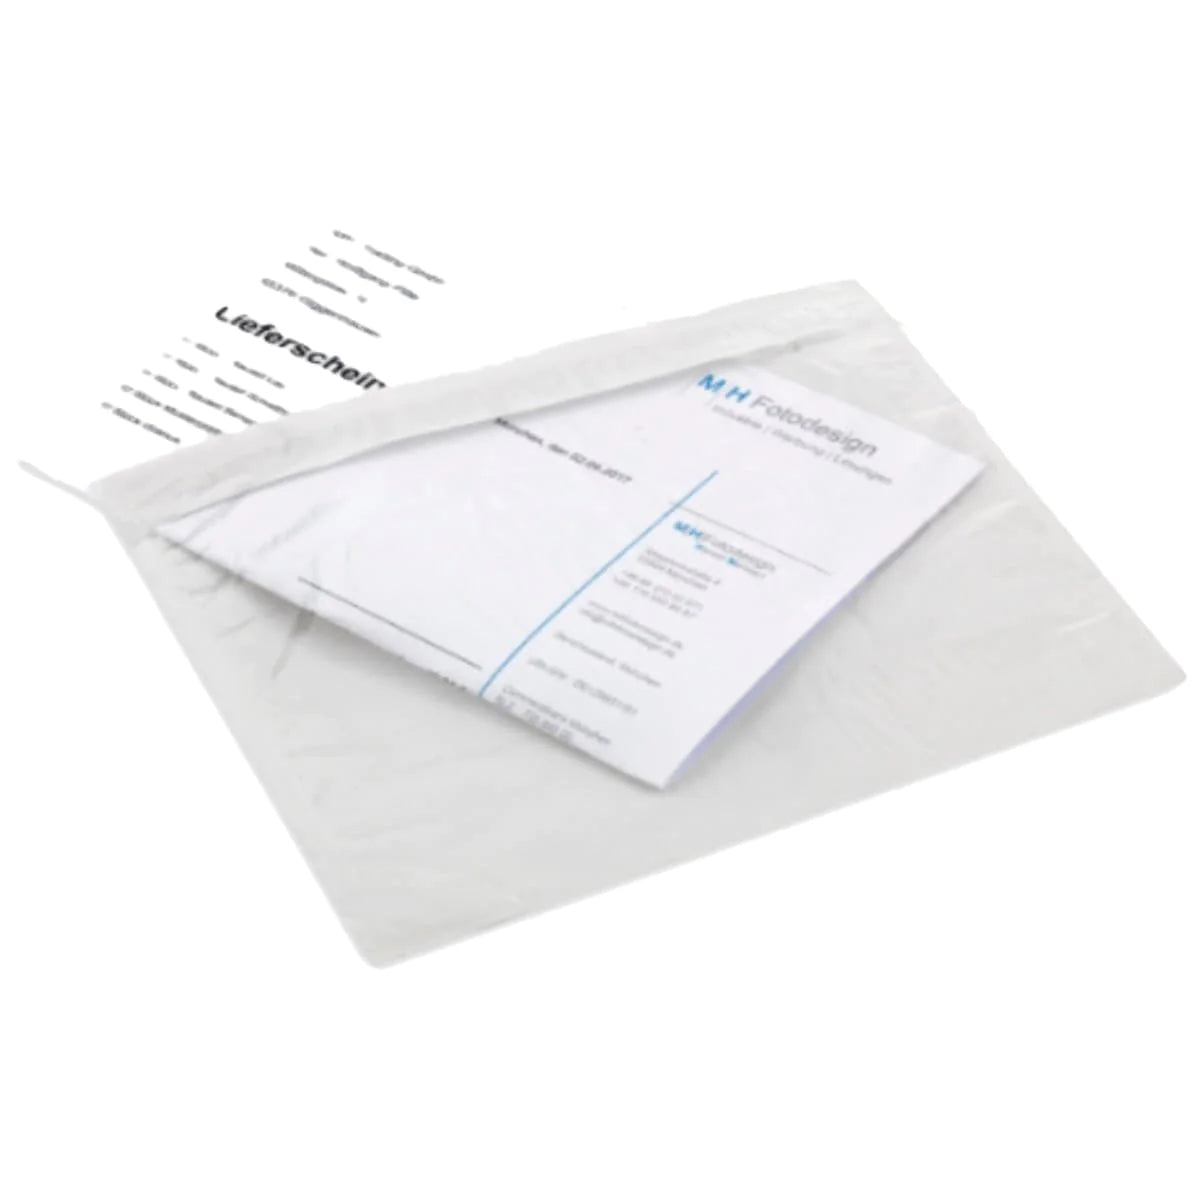 Clear Self-Adhesive Shipping Document/Bill Pockets C5-, 145x225mm, 100/pack